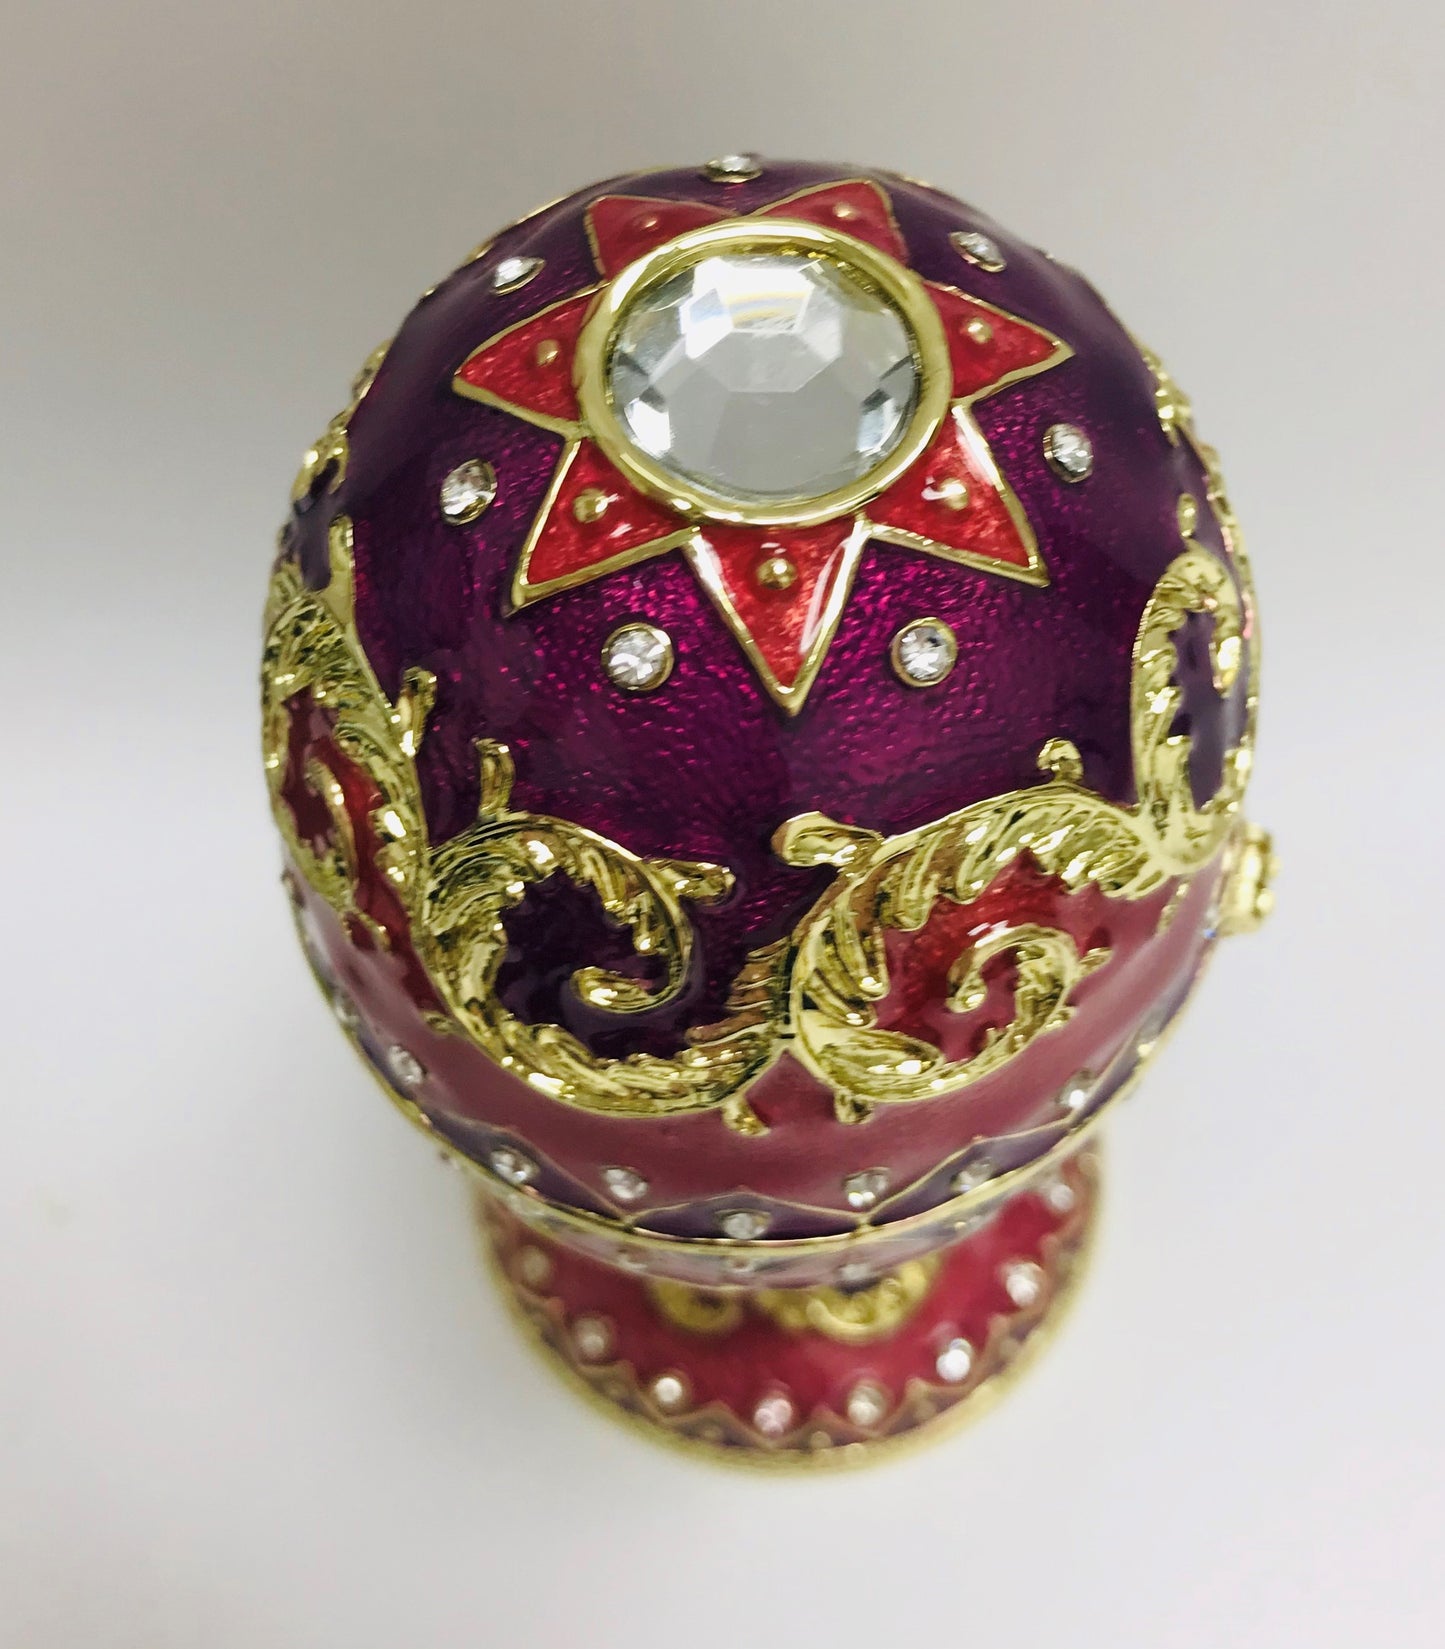 Cristiani Collection Pink Purple Gold Musical Egg Trinket Box.